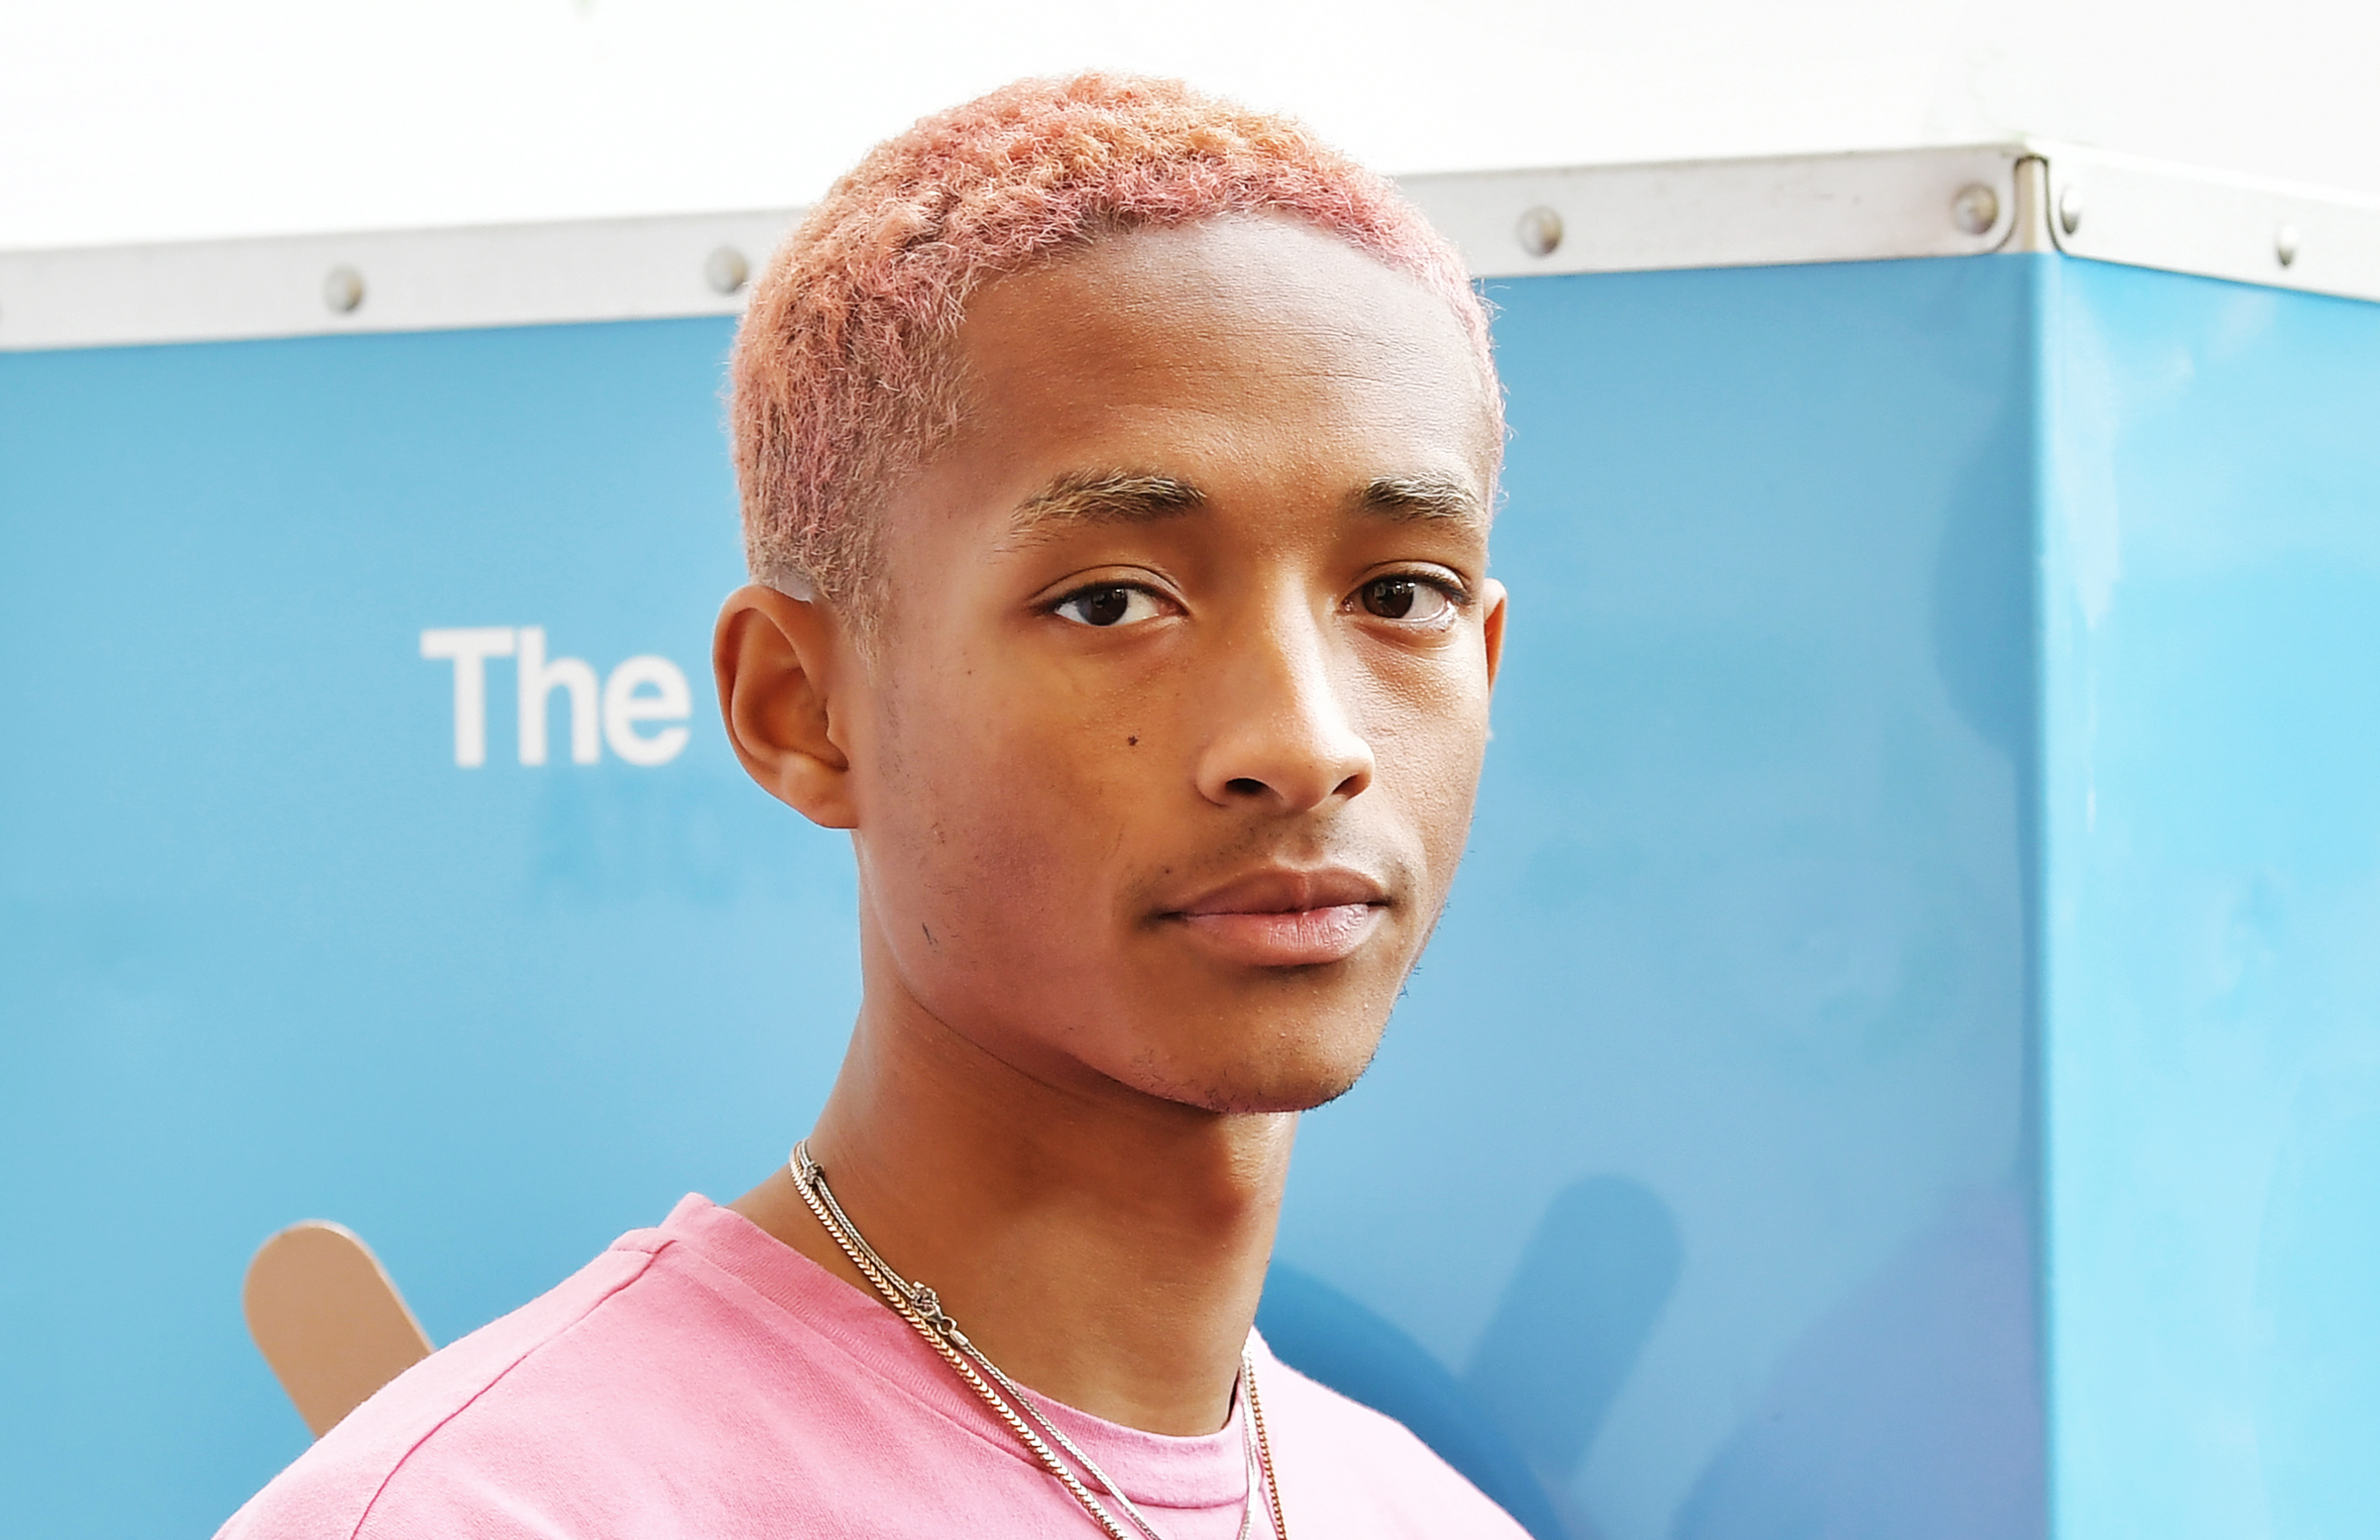 Jaden Smith Looking For Fashion CEO on Twitter